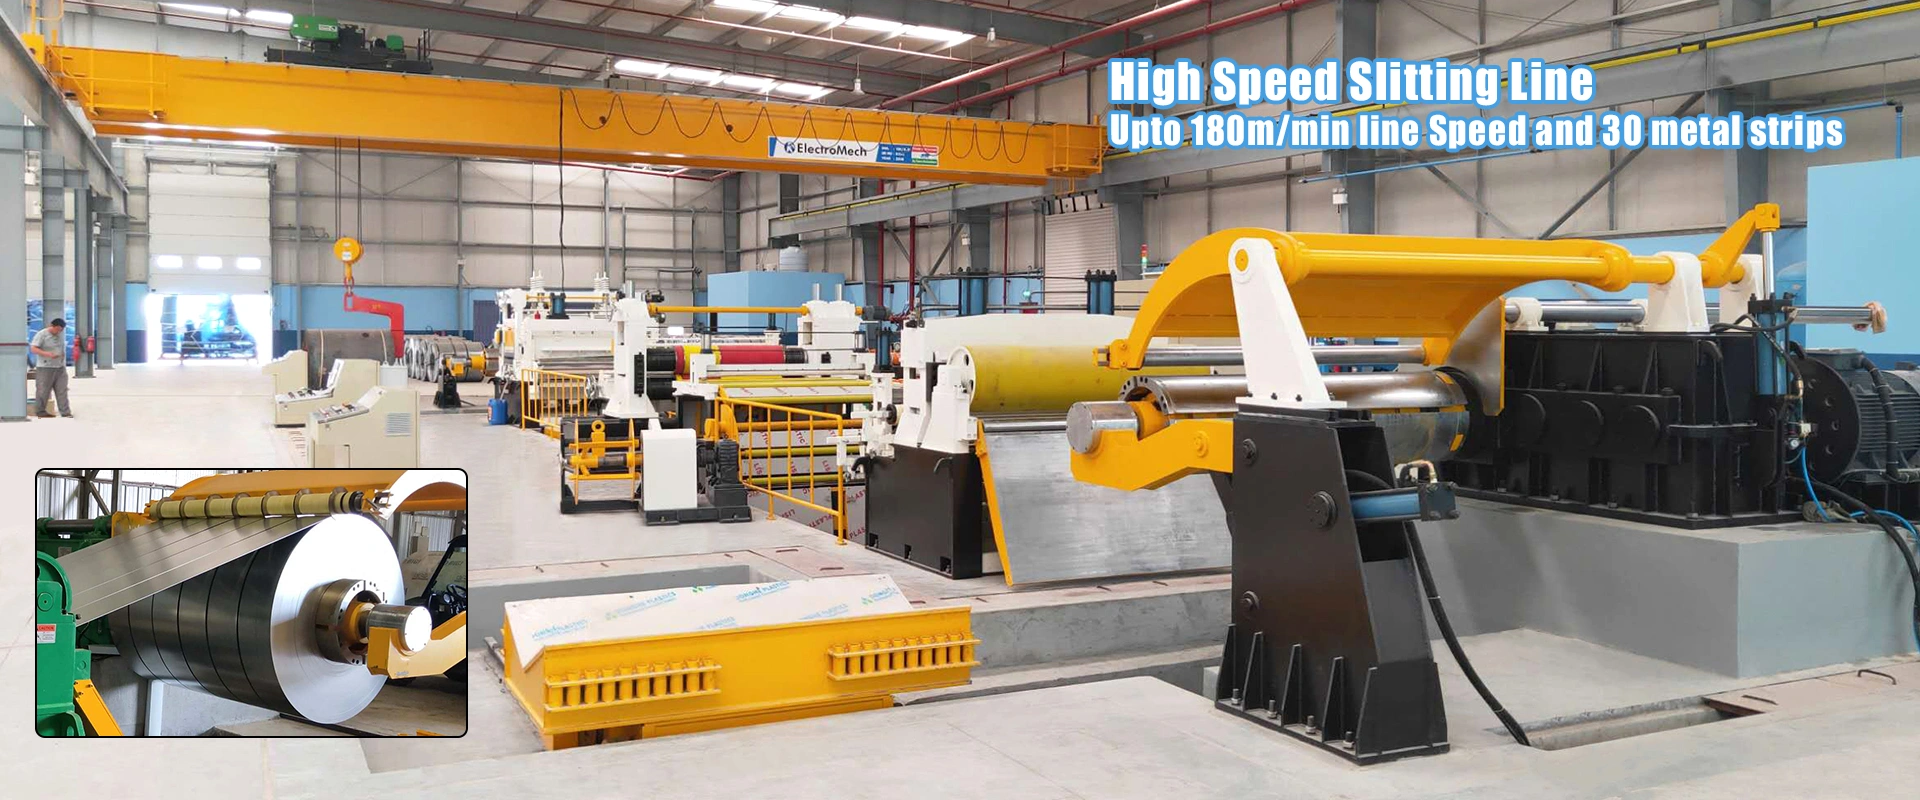 High Speed Slitting Line Upto 180m/min line Speed  and 30 metal strips